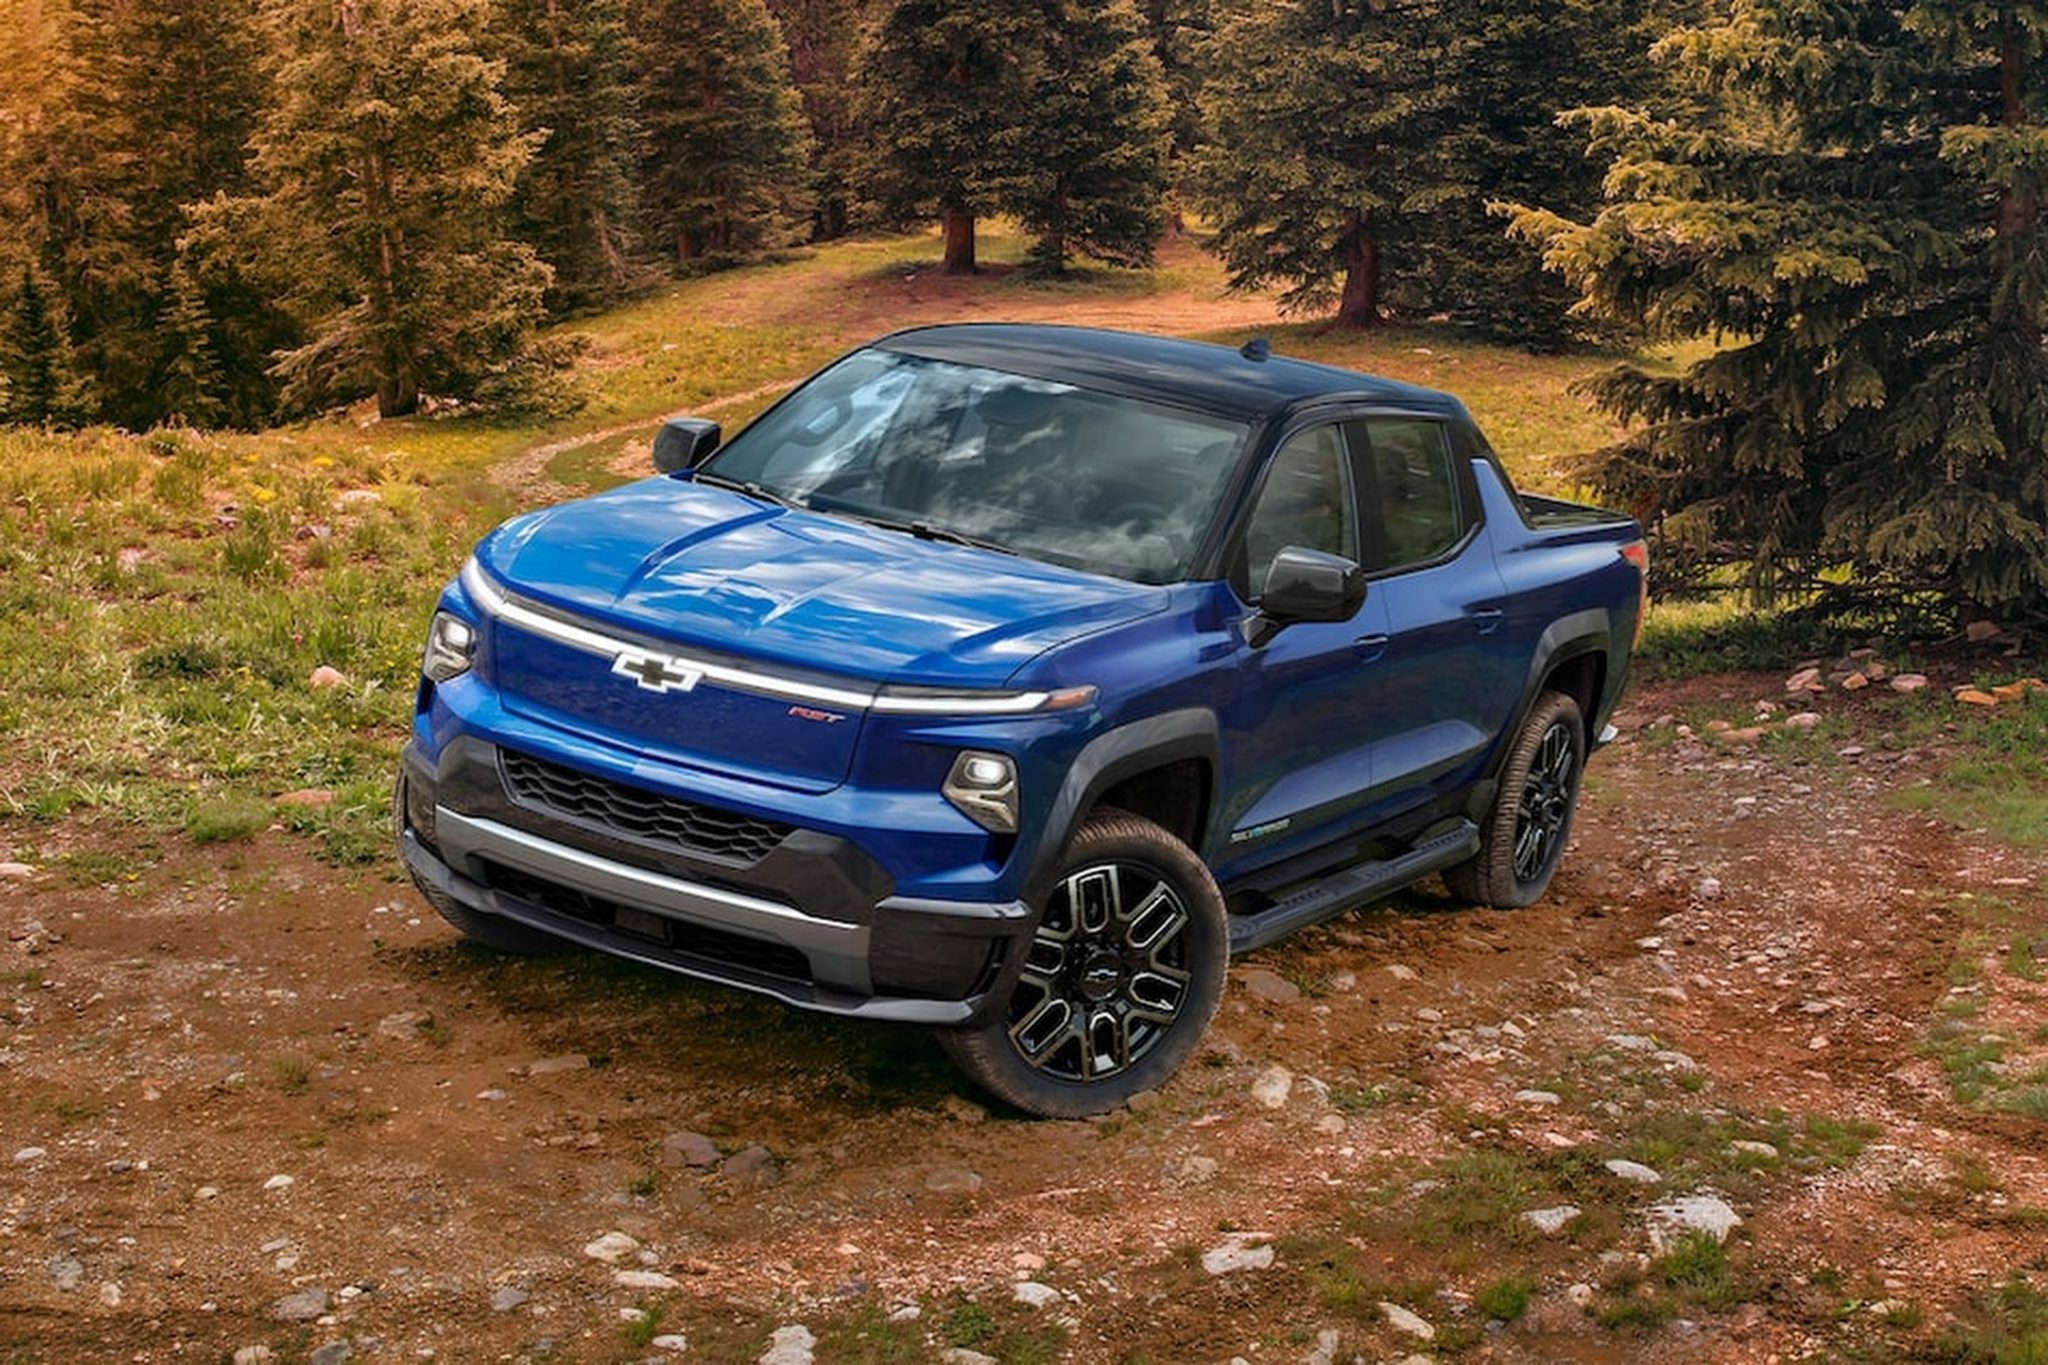 The Top 5 If Picking An EV Truck, Make It One OF These